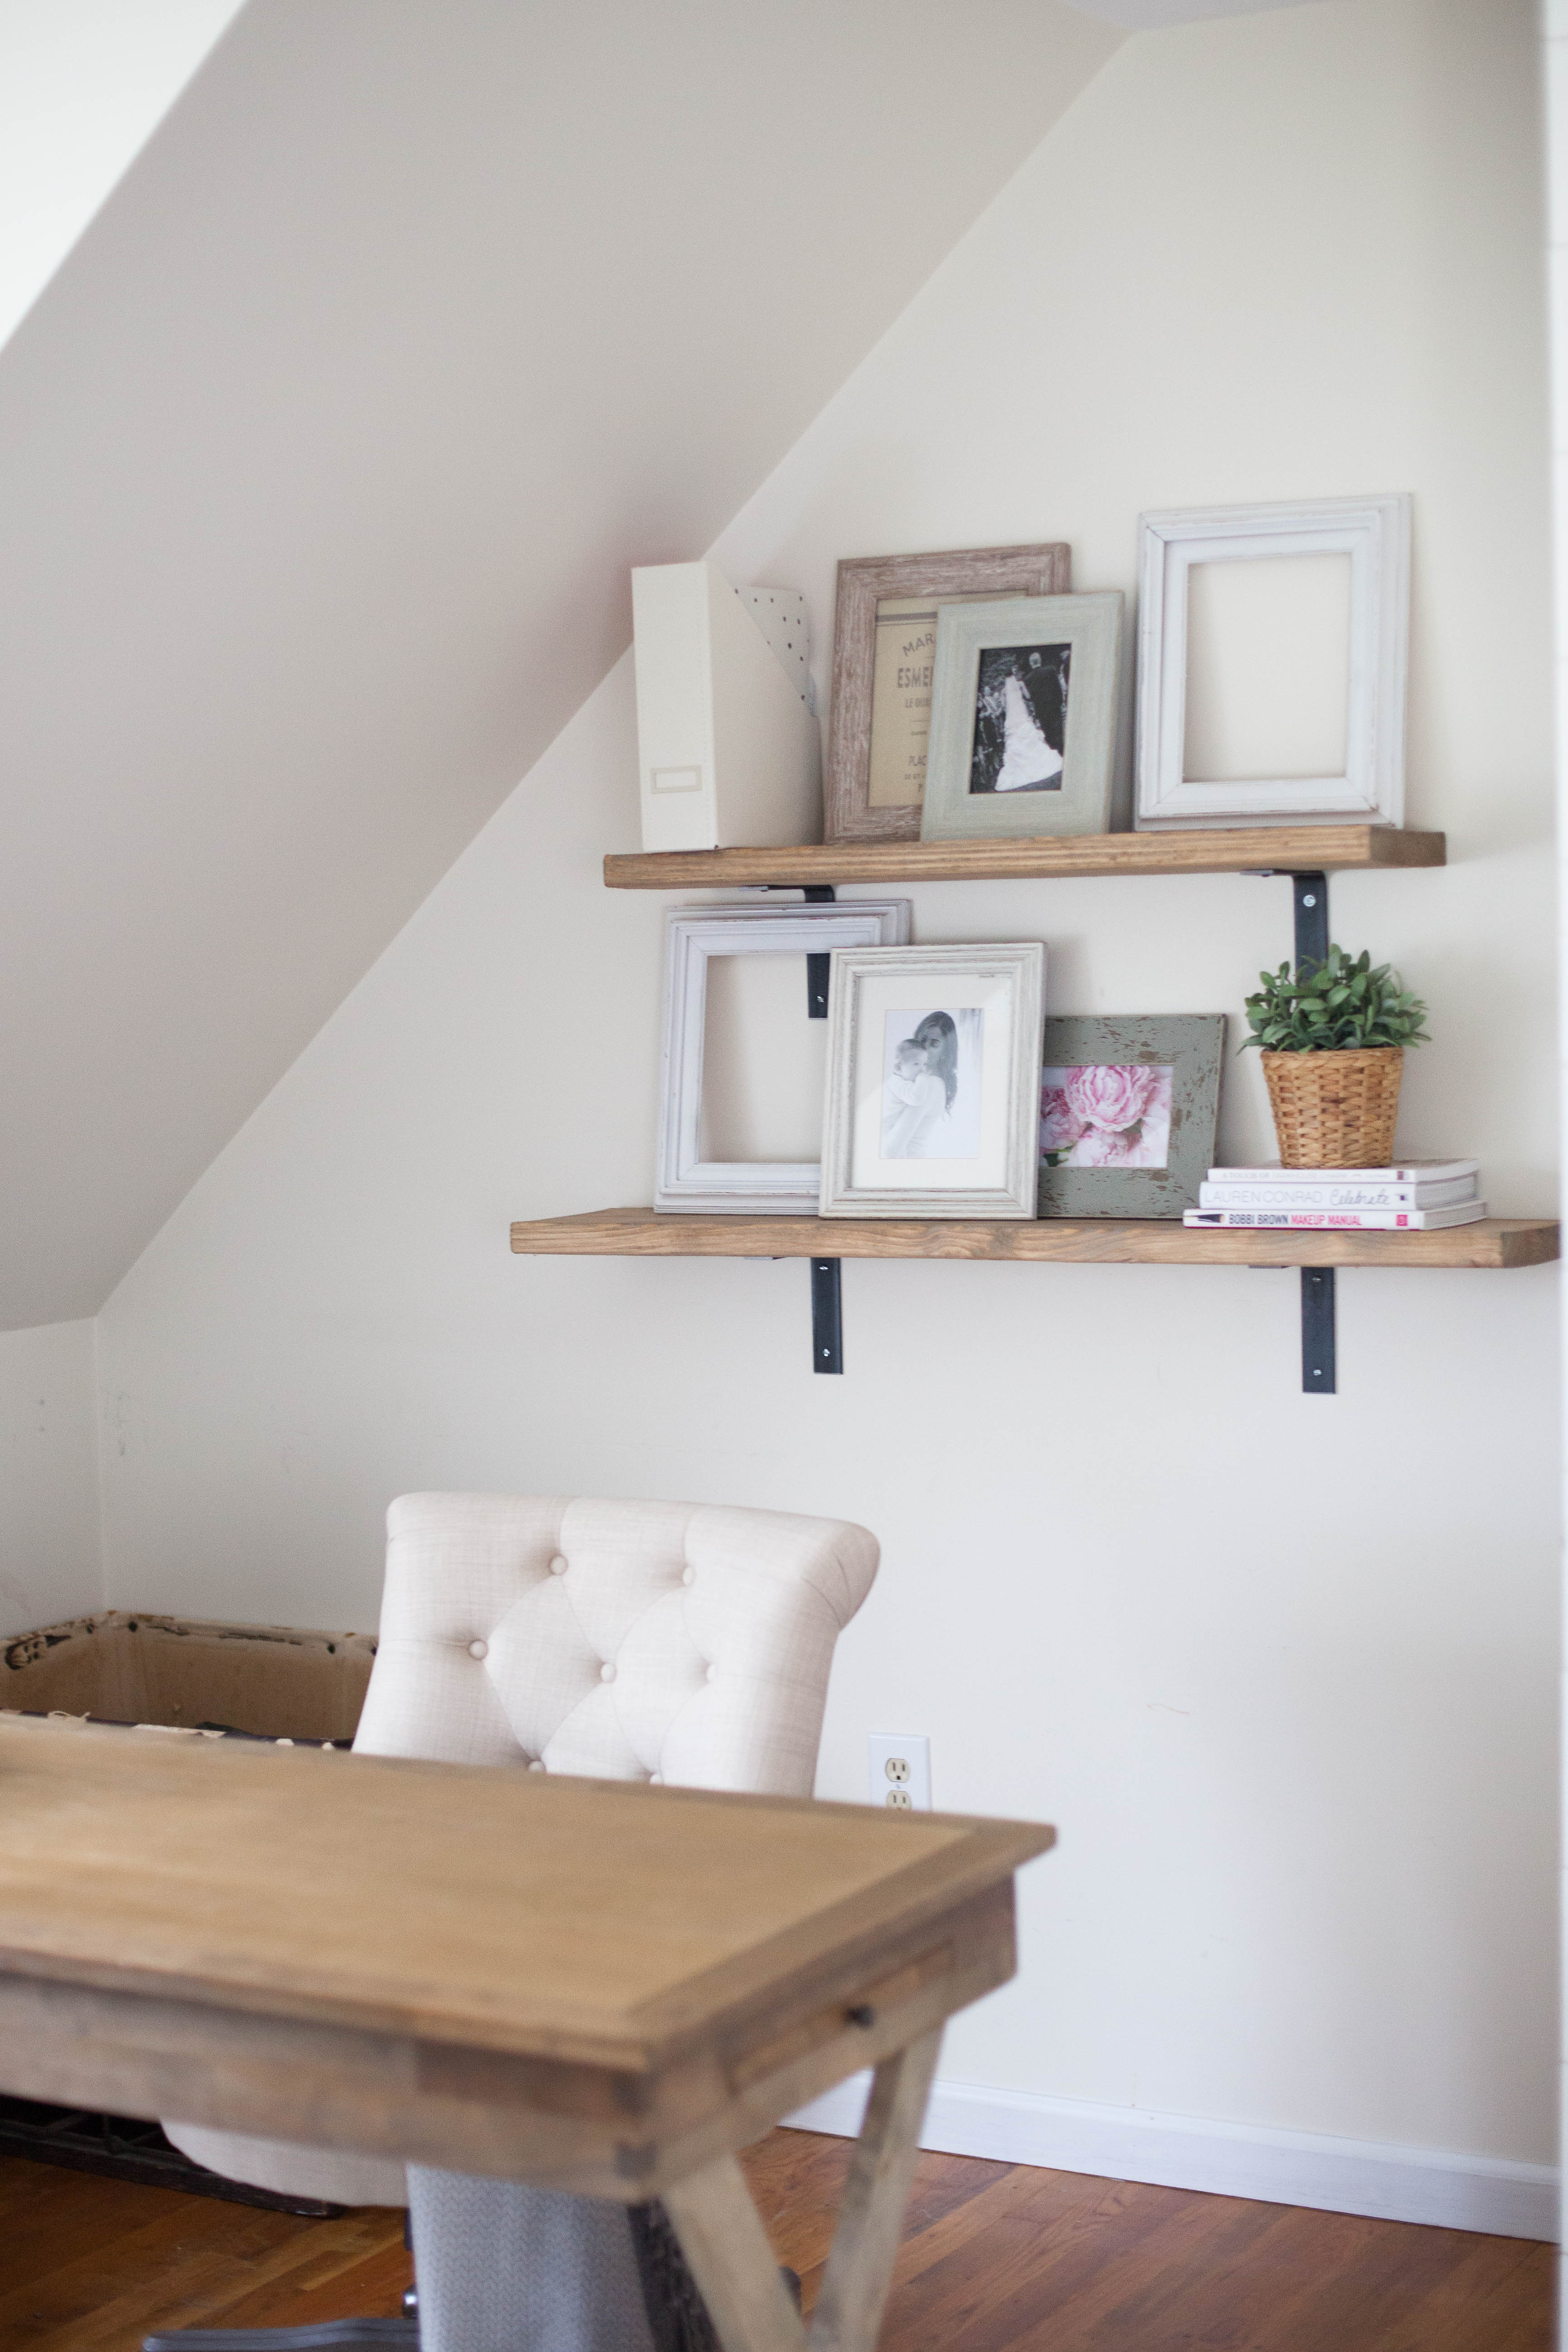 This simple DIY rustic shelving is SO easy that anyone can do it! 